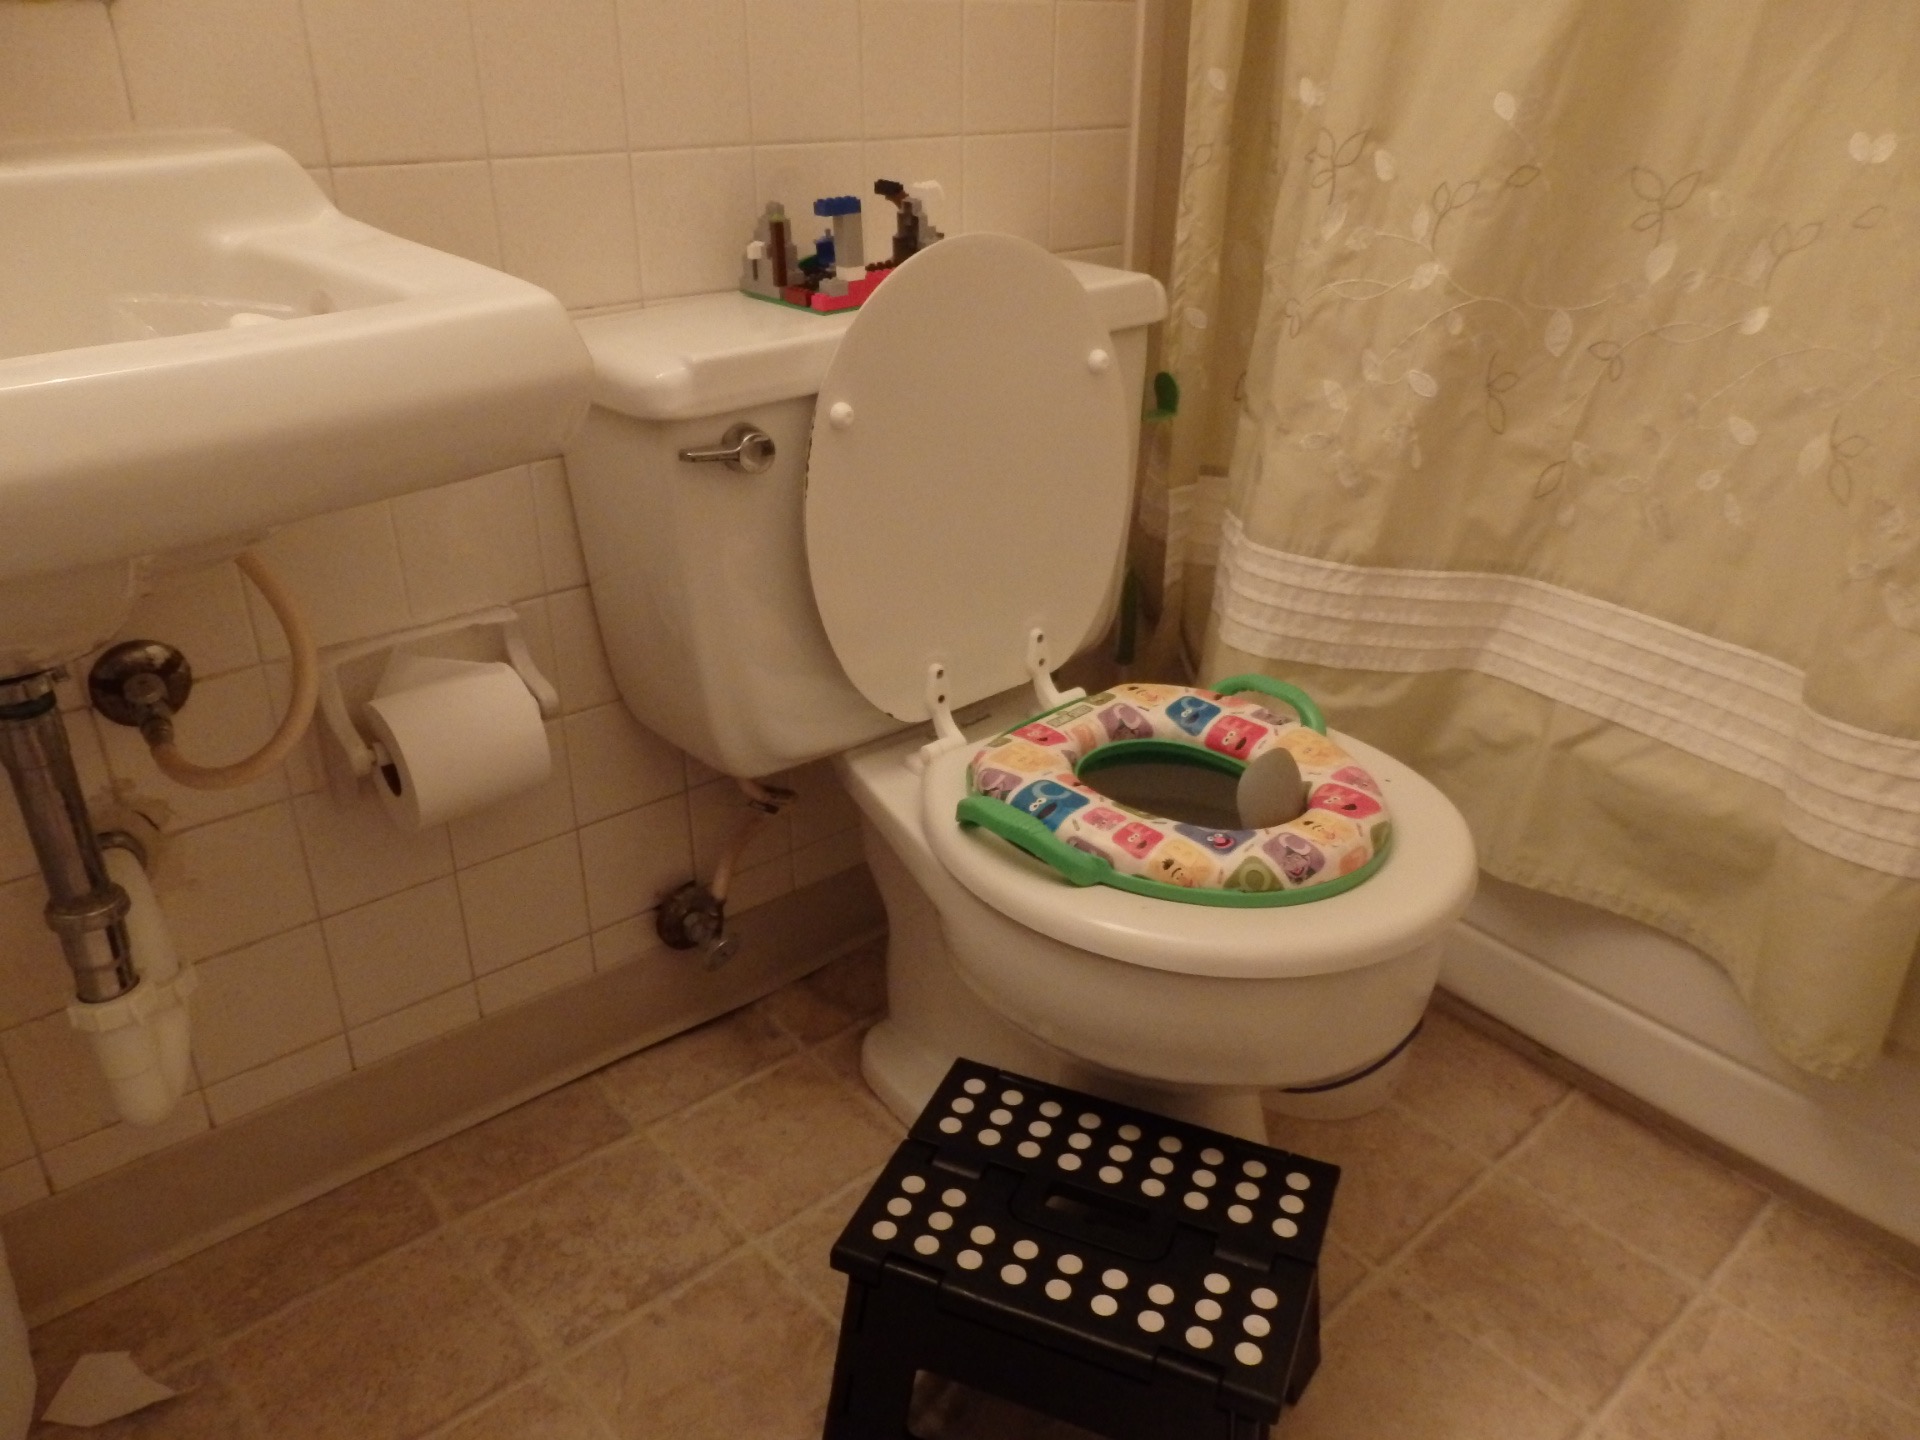 a child's lego building sitting on the toilet tank